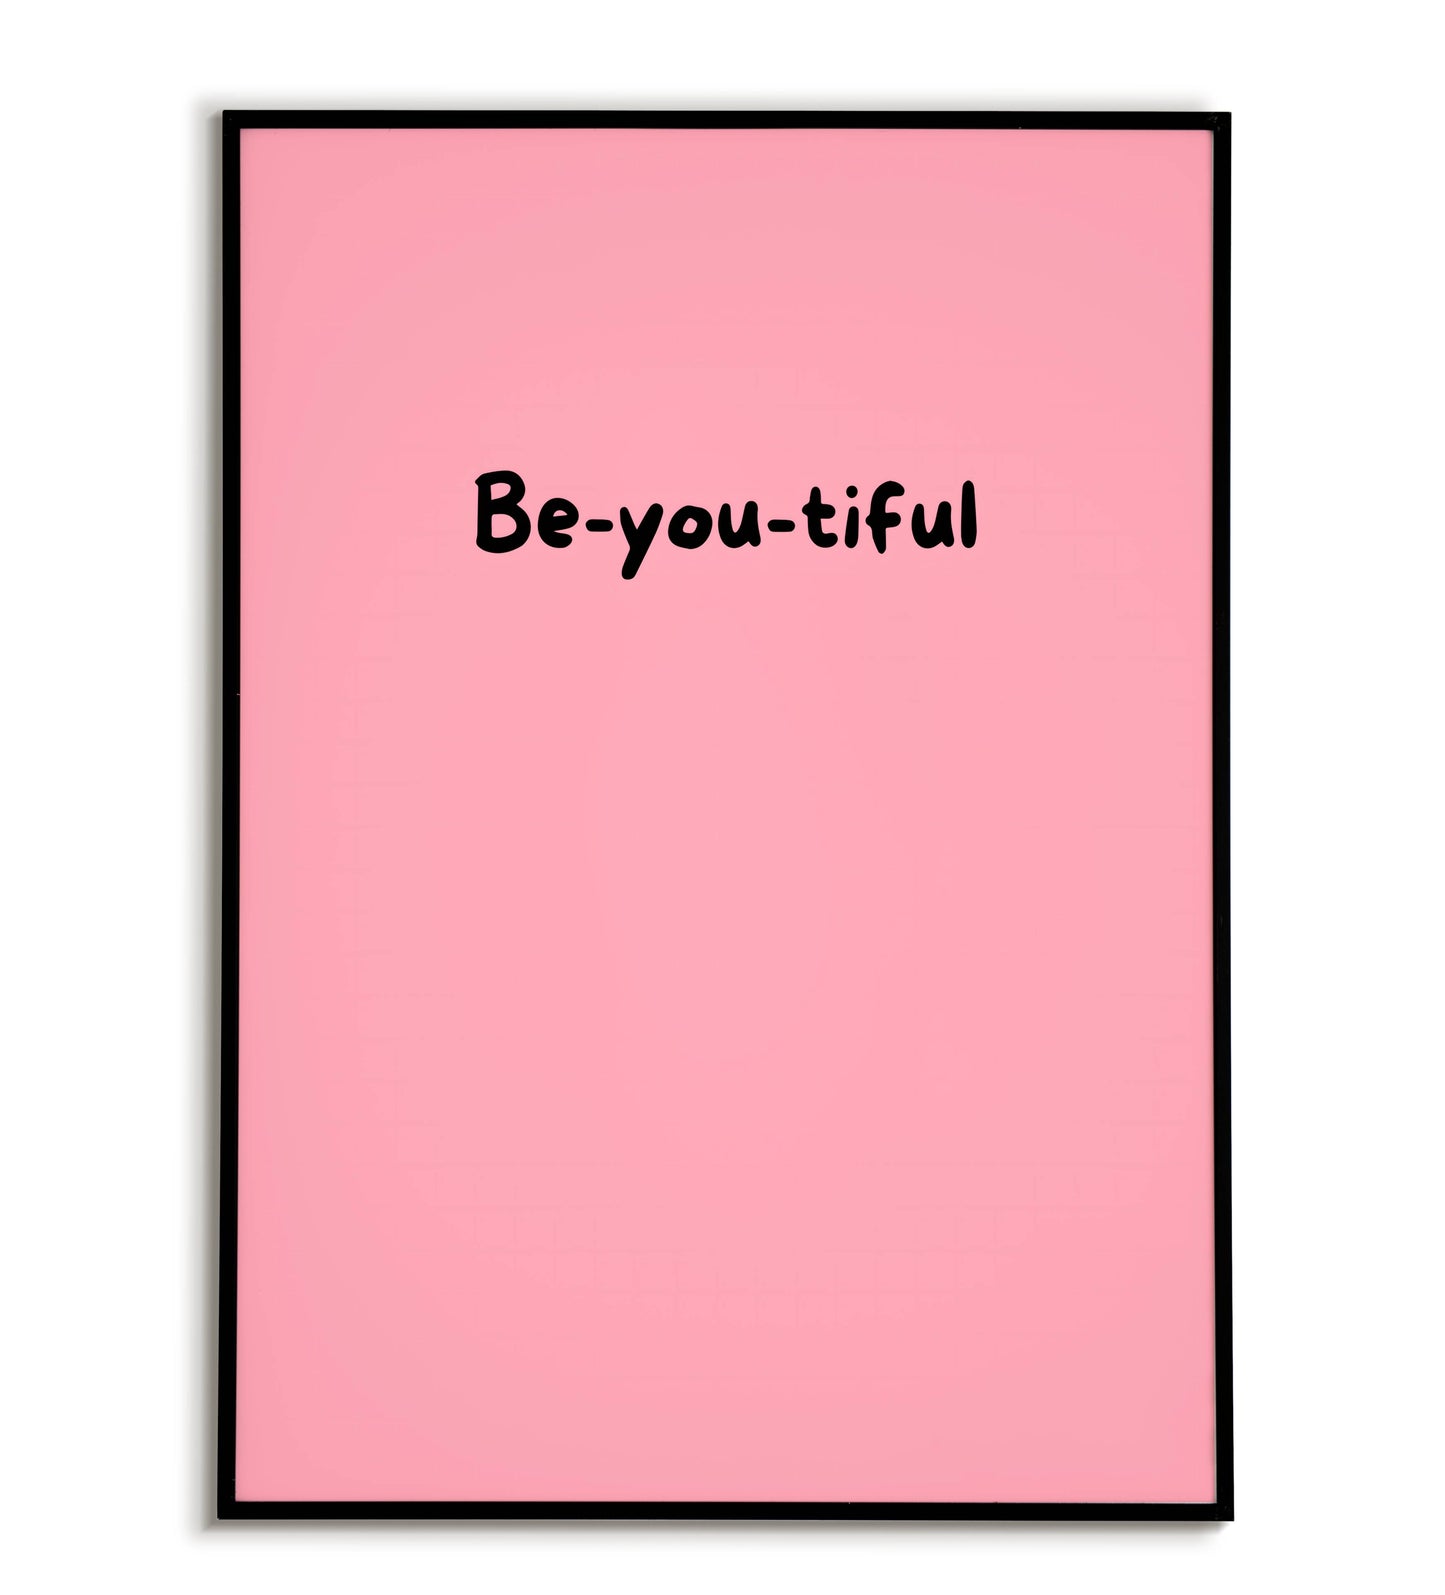 Empowering "Be-you-tiful" printable poster, celebrate self-love and individuality.	